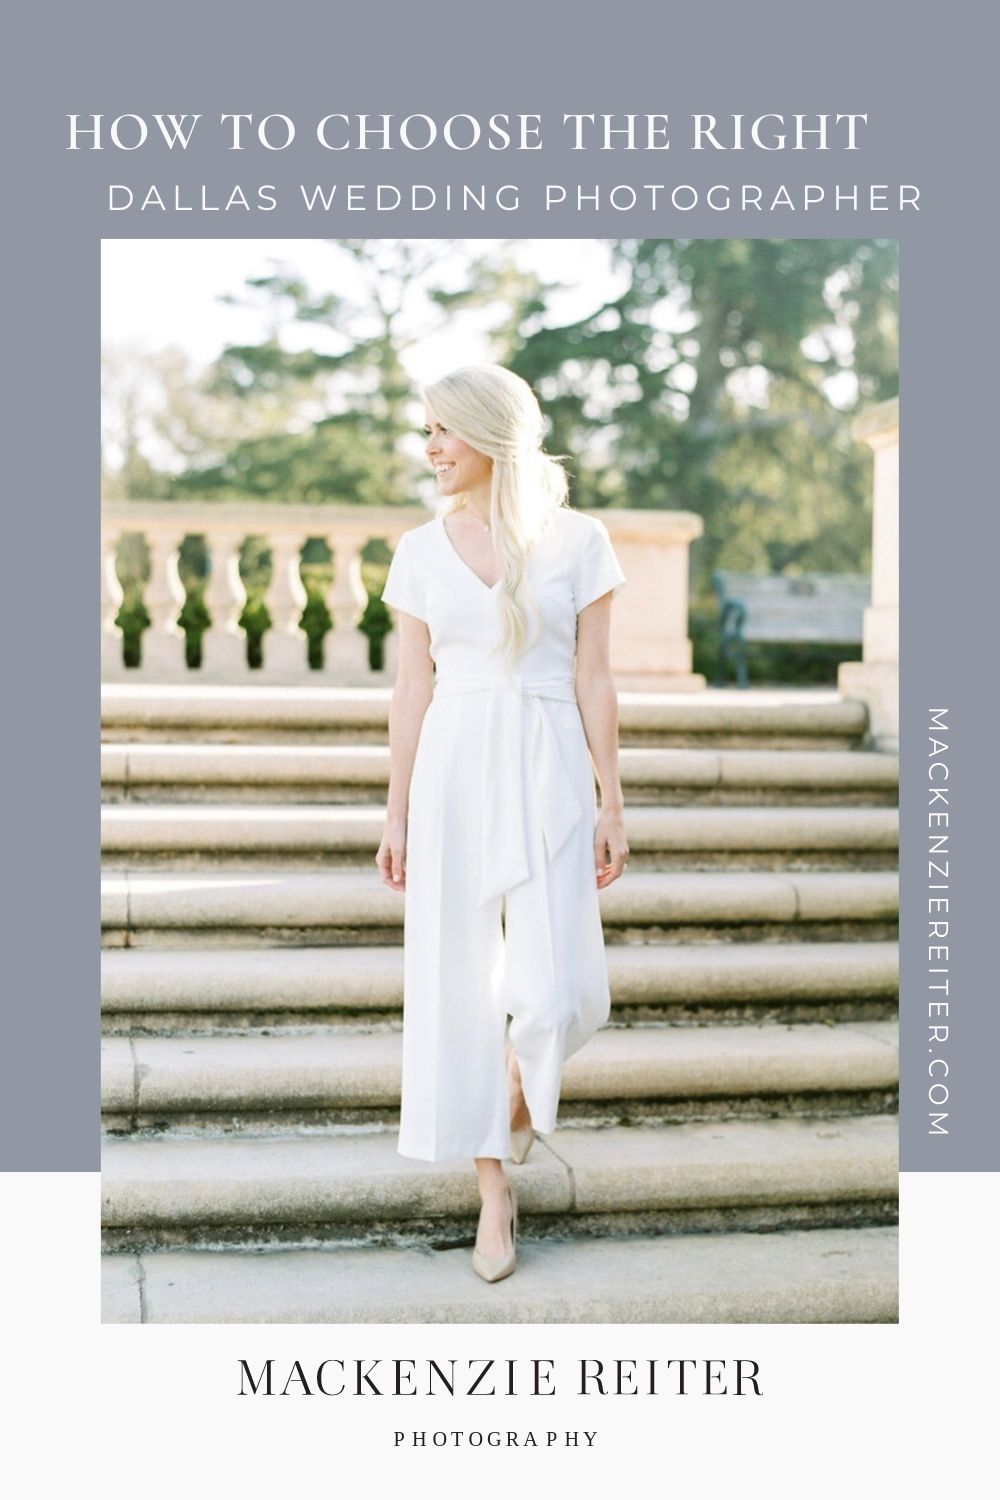 Mackenzie Reiter of Mackenzie Reiter Photography wearing an ethereal white dress as she descends down the steps of a vintage location; image overlaid with text that reads How to Choose the Right Dallas Wedding Photographer